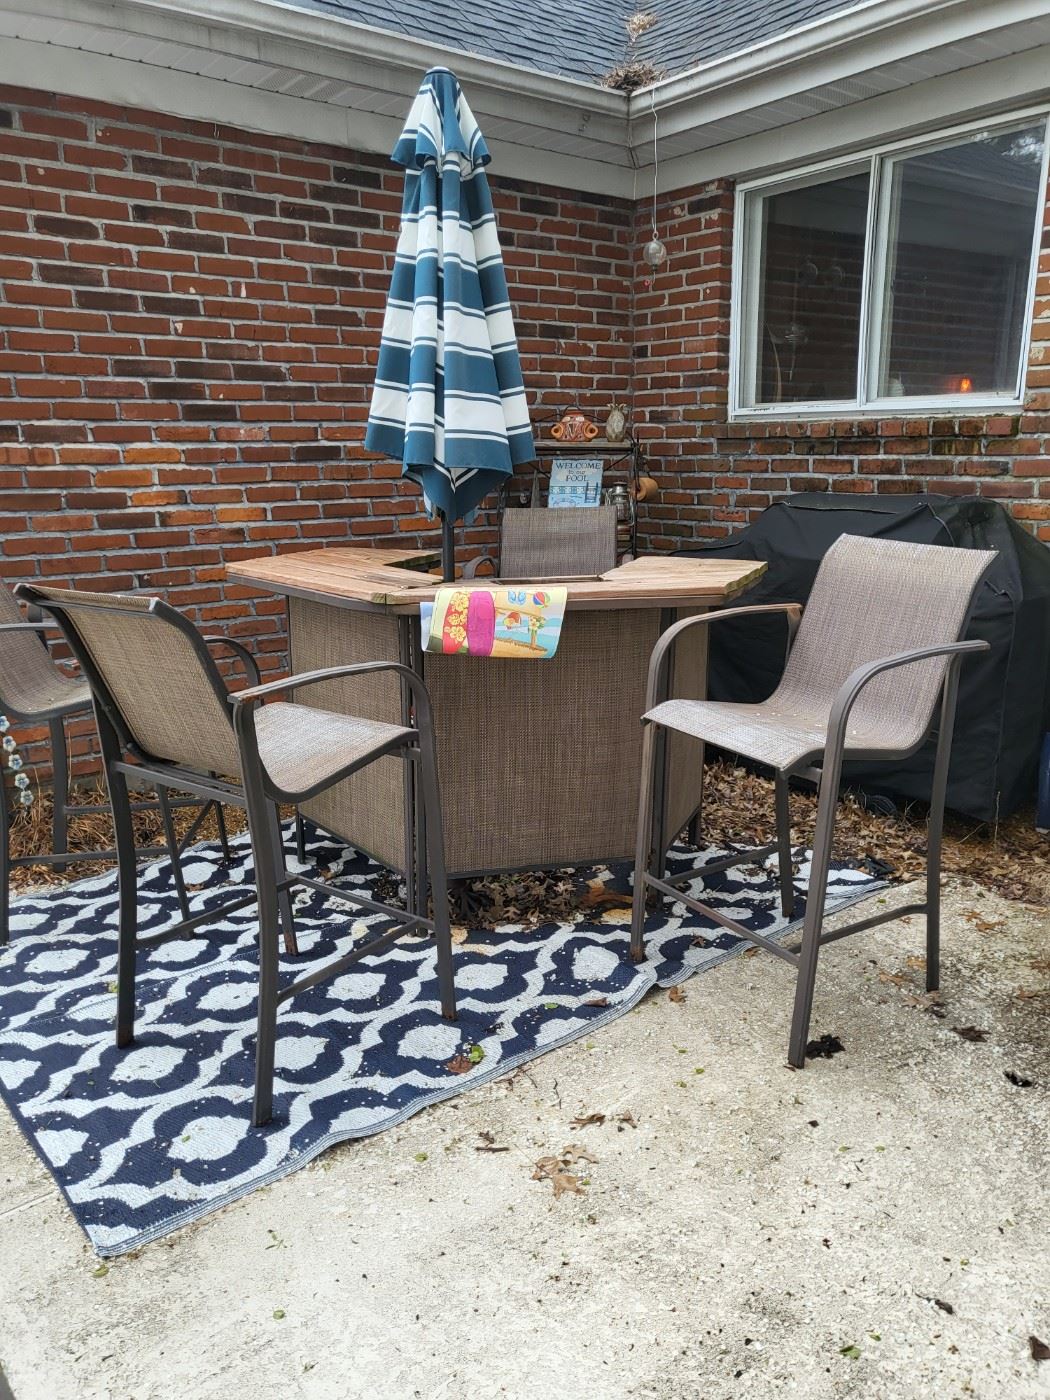 Patio table and umbrella at 4 chairs